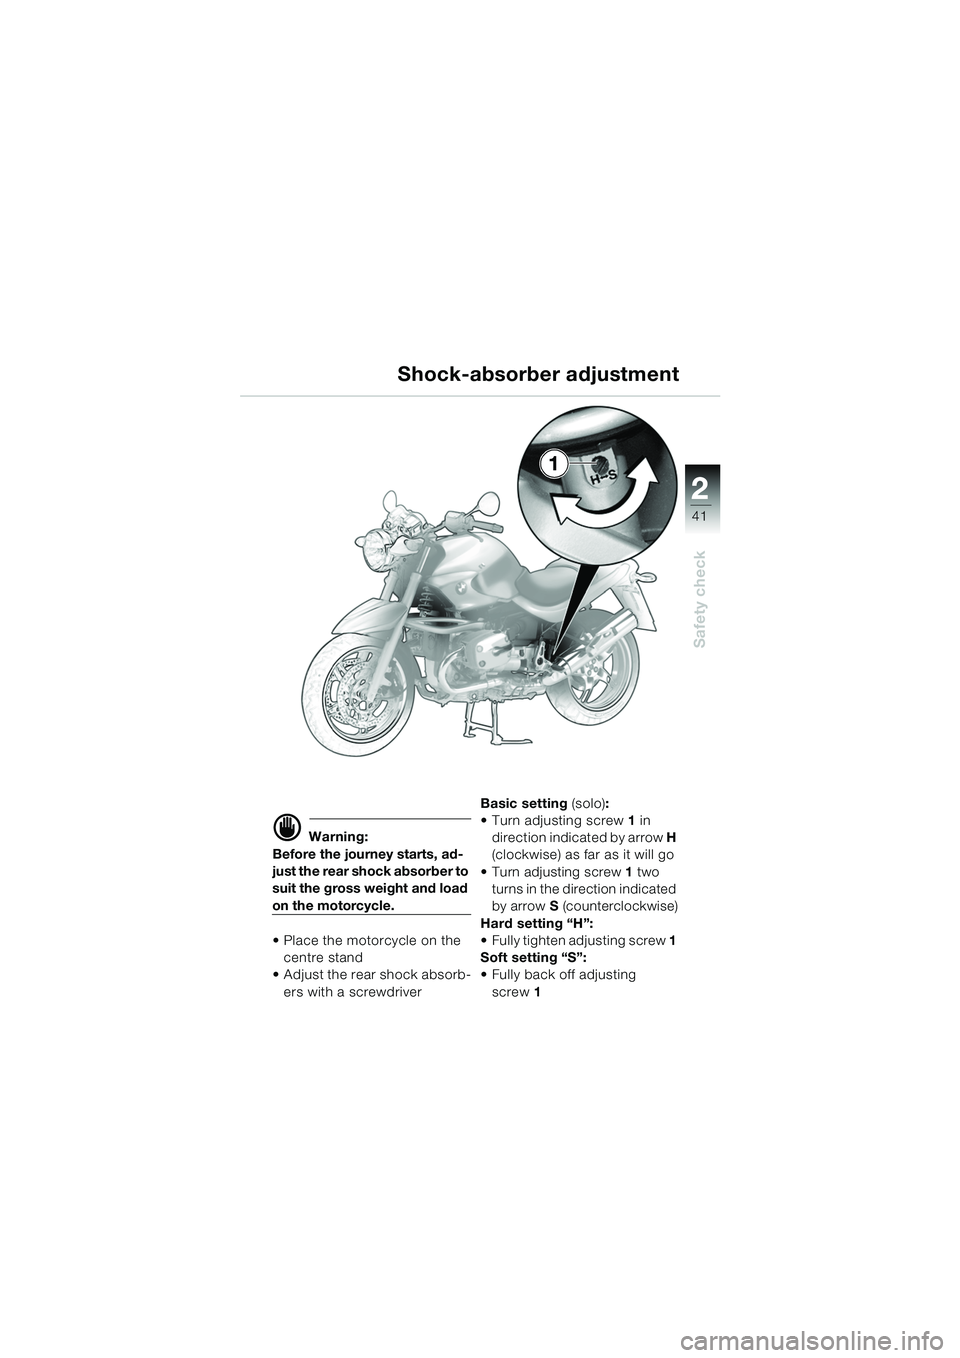 BMW MOTORRAD R 850 R 2004  Riders Manual (in English) 2
41
2
Safety check
Shock-absorber adjustment
d Warning:
Before the journey starts, ad-
just the rear shock absorber to 
suit the gross weight and load 
on the motorcycle.
 Place the motorcycle on th